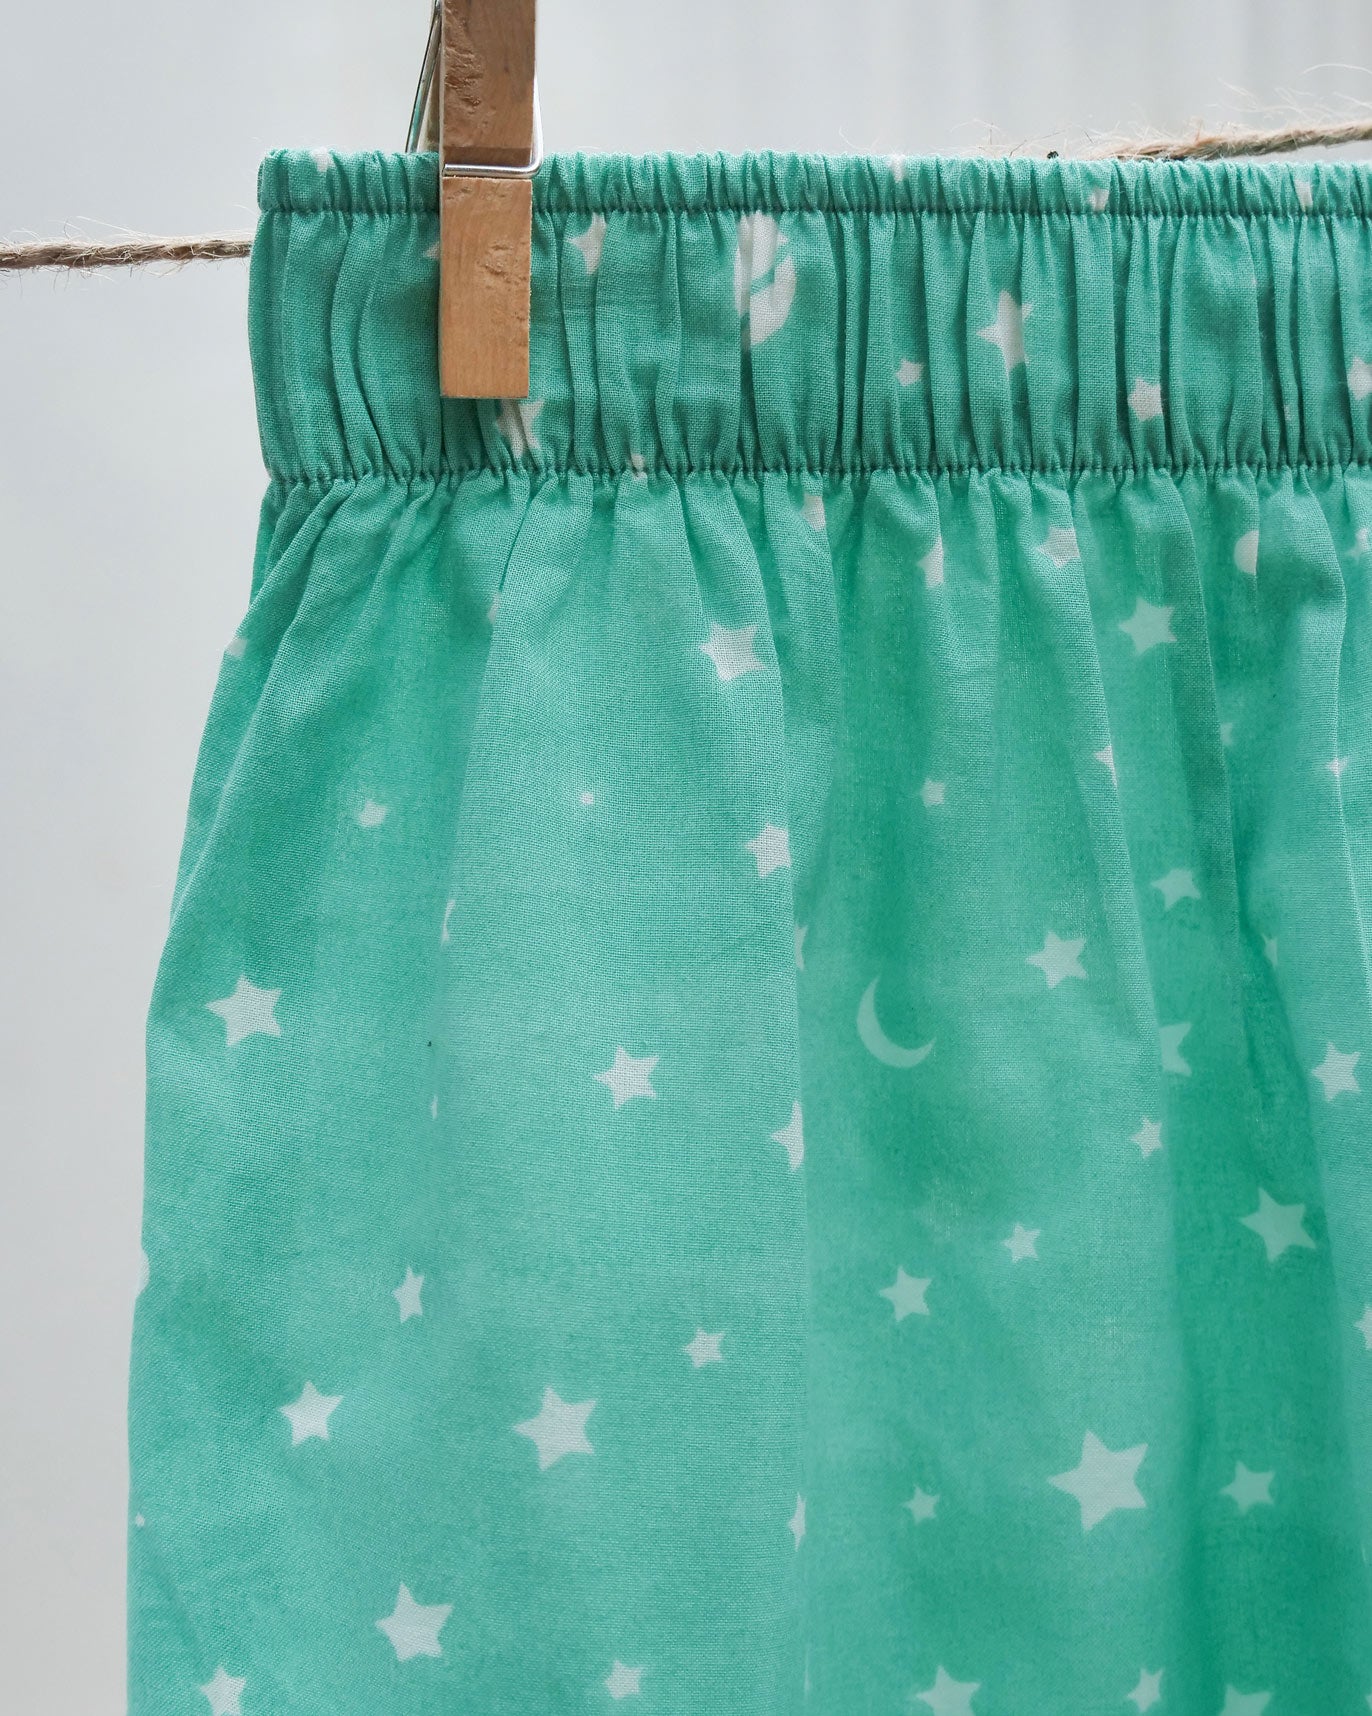 All The Stars Boxers (Set of 2) - White & Turquoise